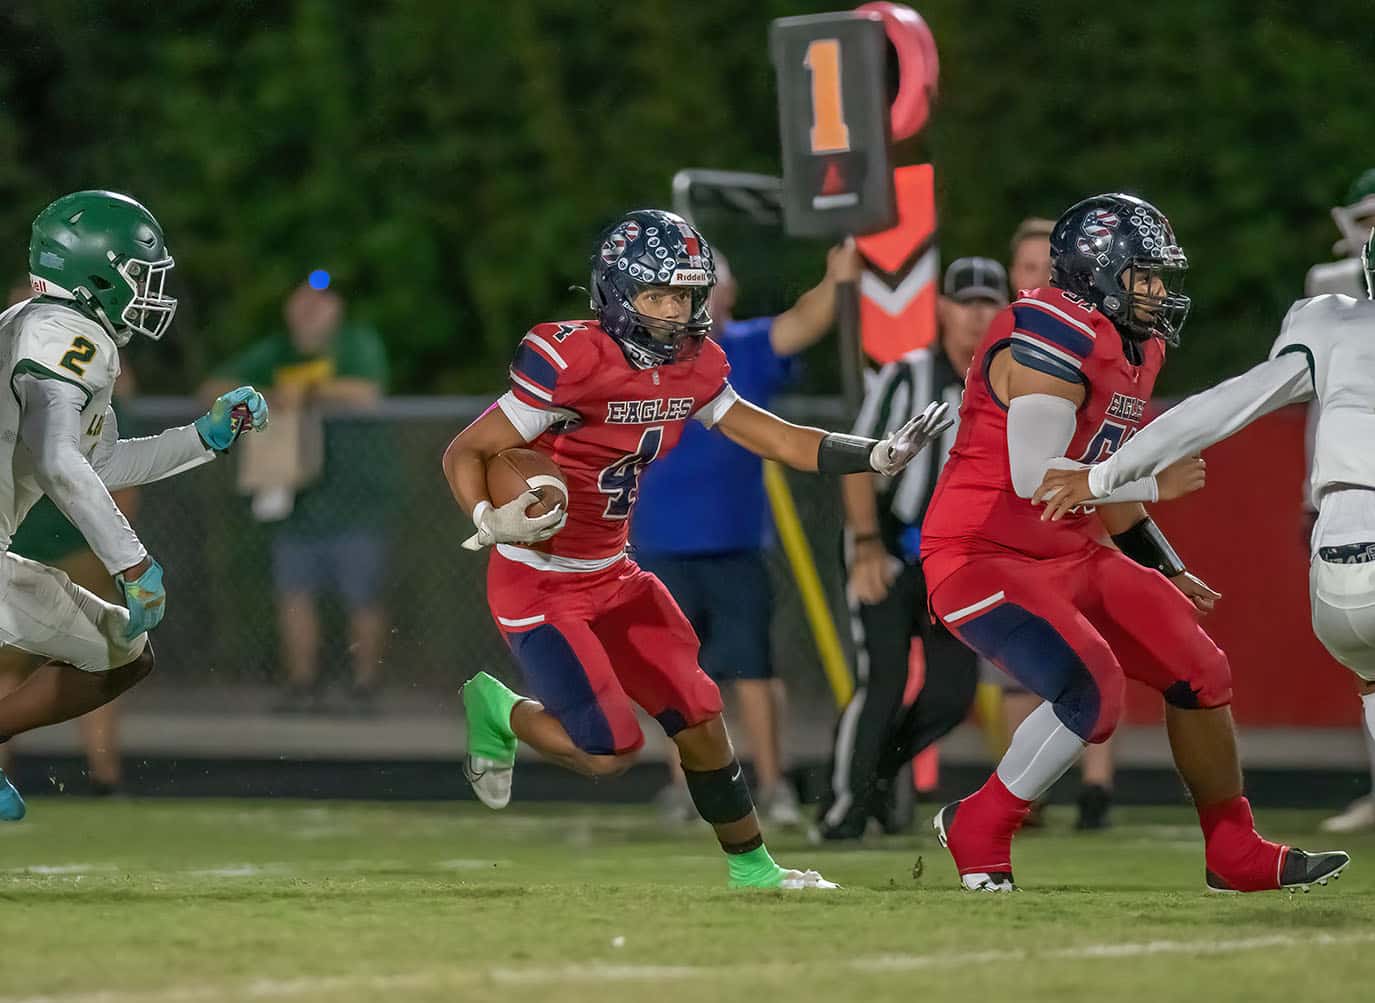 Eagle running back, 4, Connor Mccazzio finds running room against the Lecanto defense. Photo by JOE DiCRISTOFALO